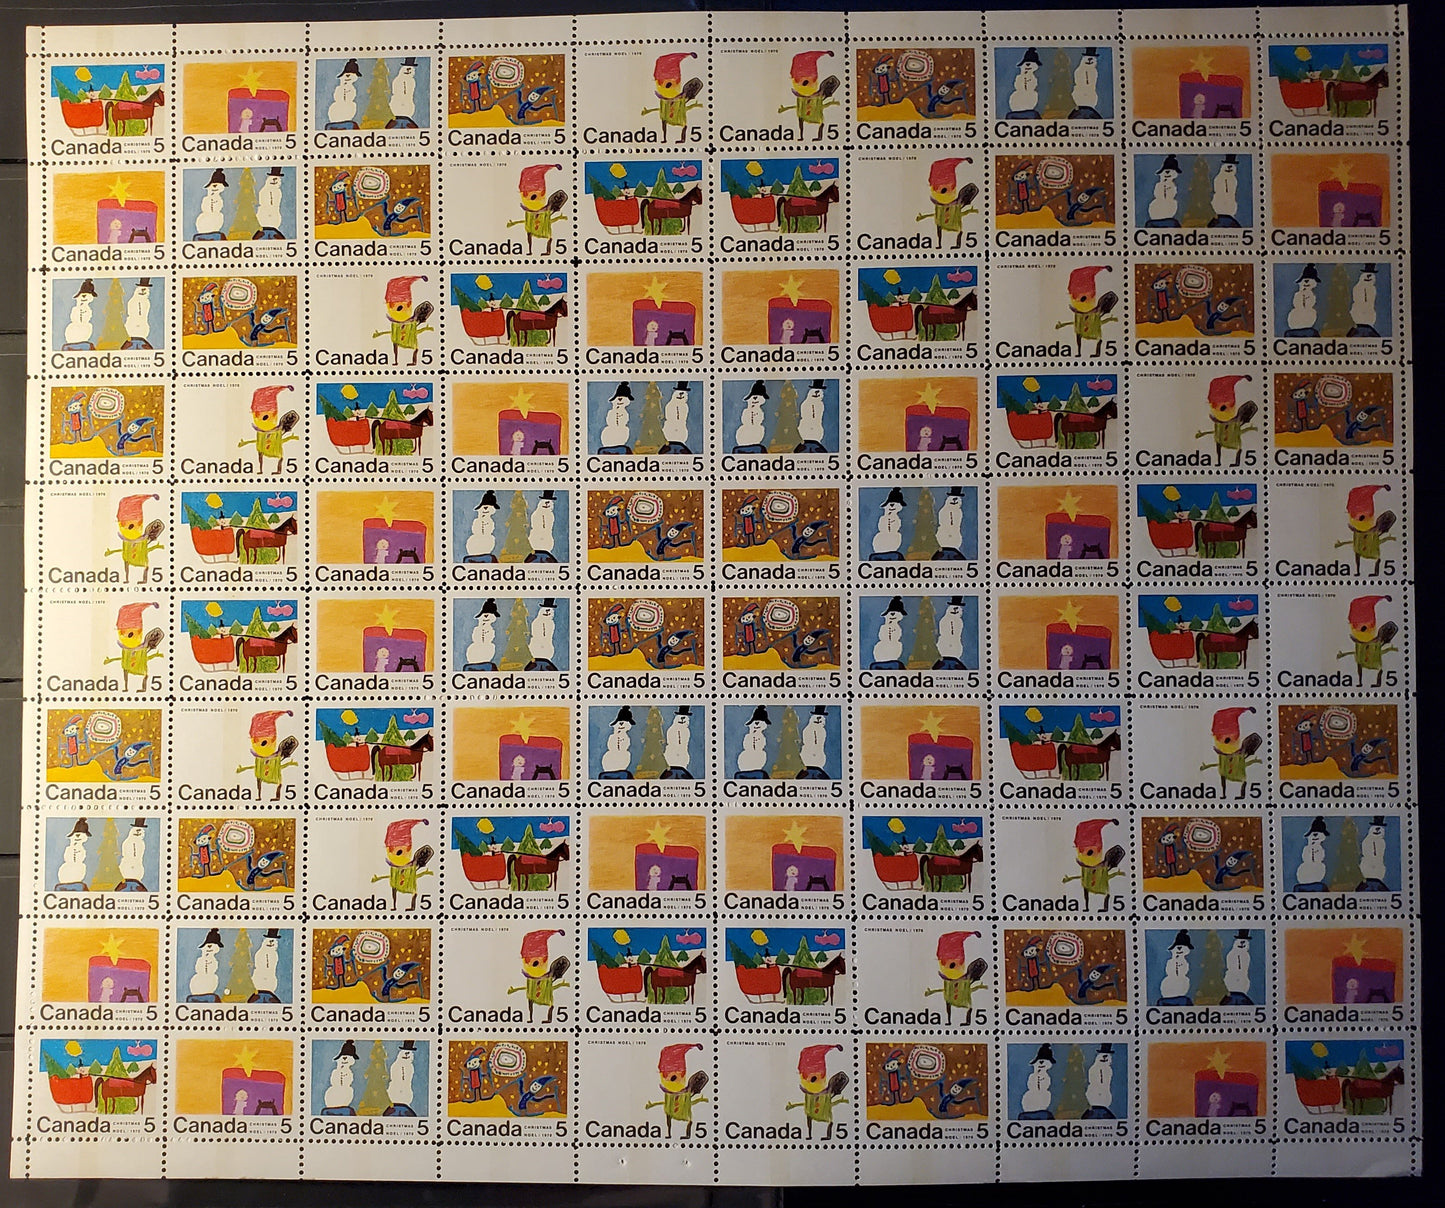 Lot 132 Canada #519p-523p 5c Multicoloured 1970 Christmas Issue, A complete Winnipeg Tagged, Unfolded Sheet of 100 Containing Combination #5 of Constant Varieties, Ribbed HB11 Paper, Perf. 11.9